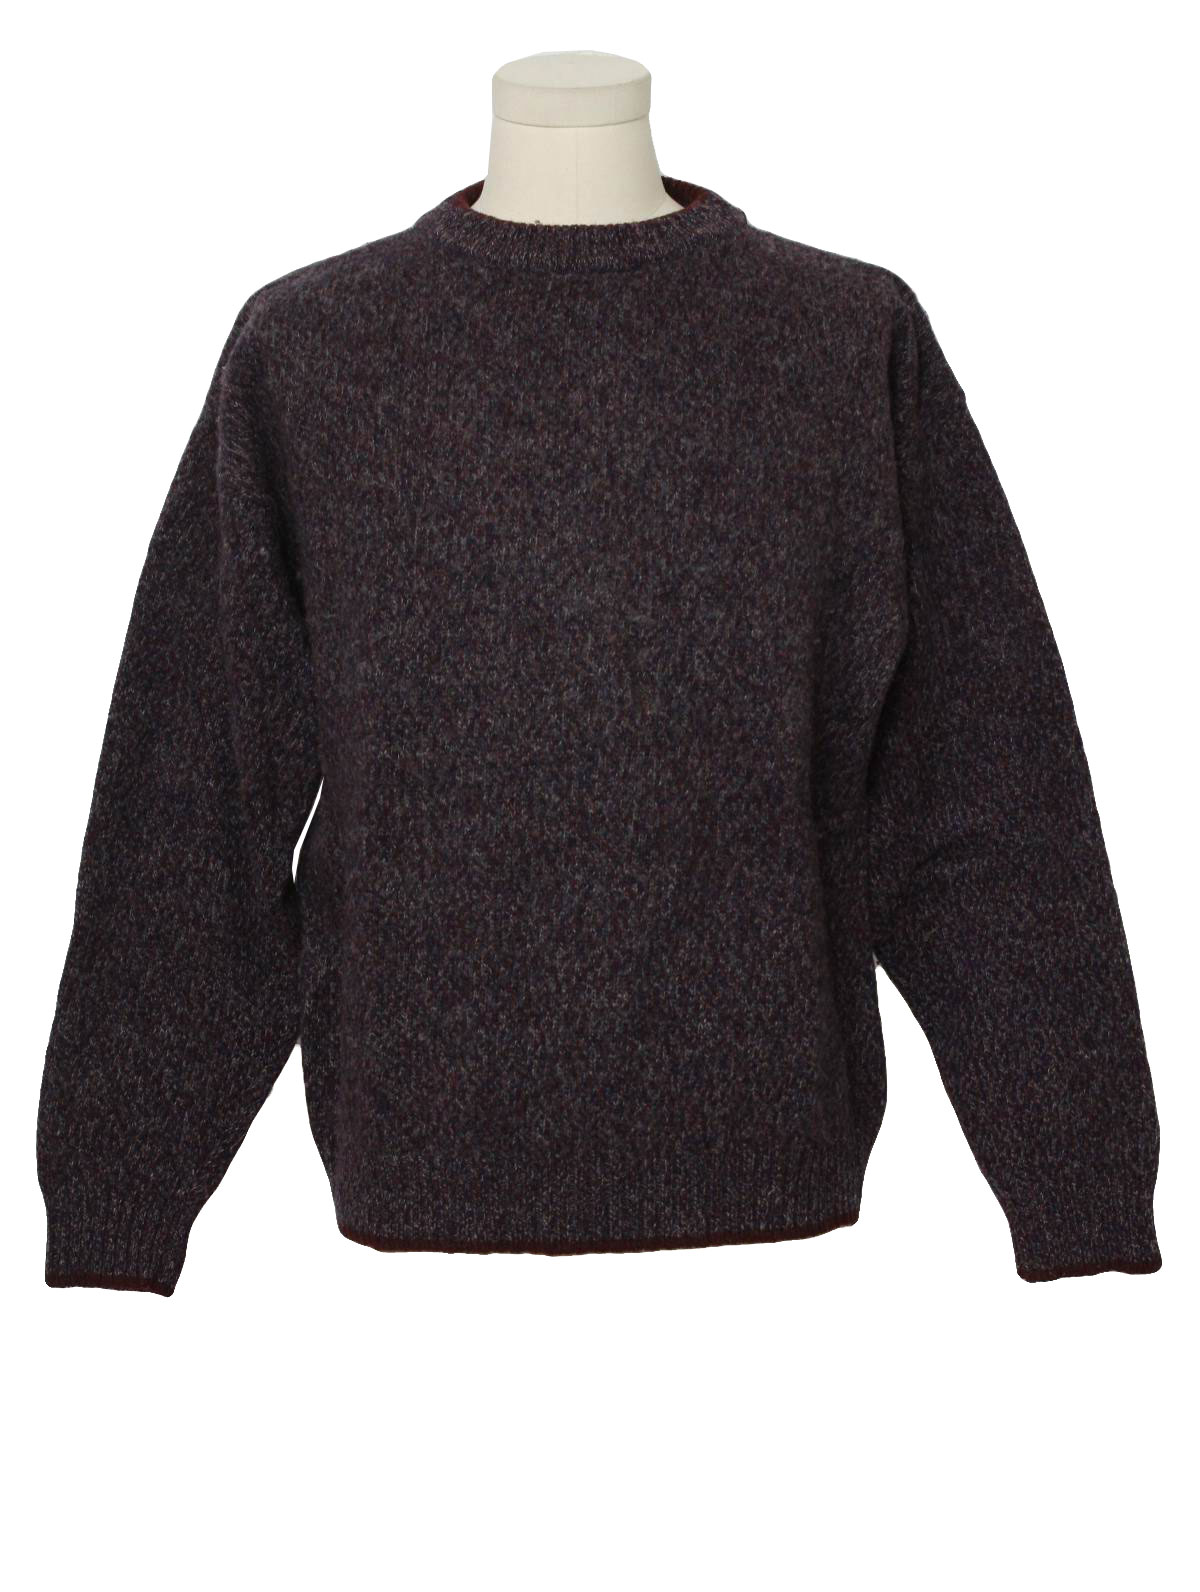 1980's Sweater (Woolrich): 80s -Woolrich- Mens heathered maroon, navy ...